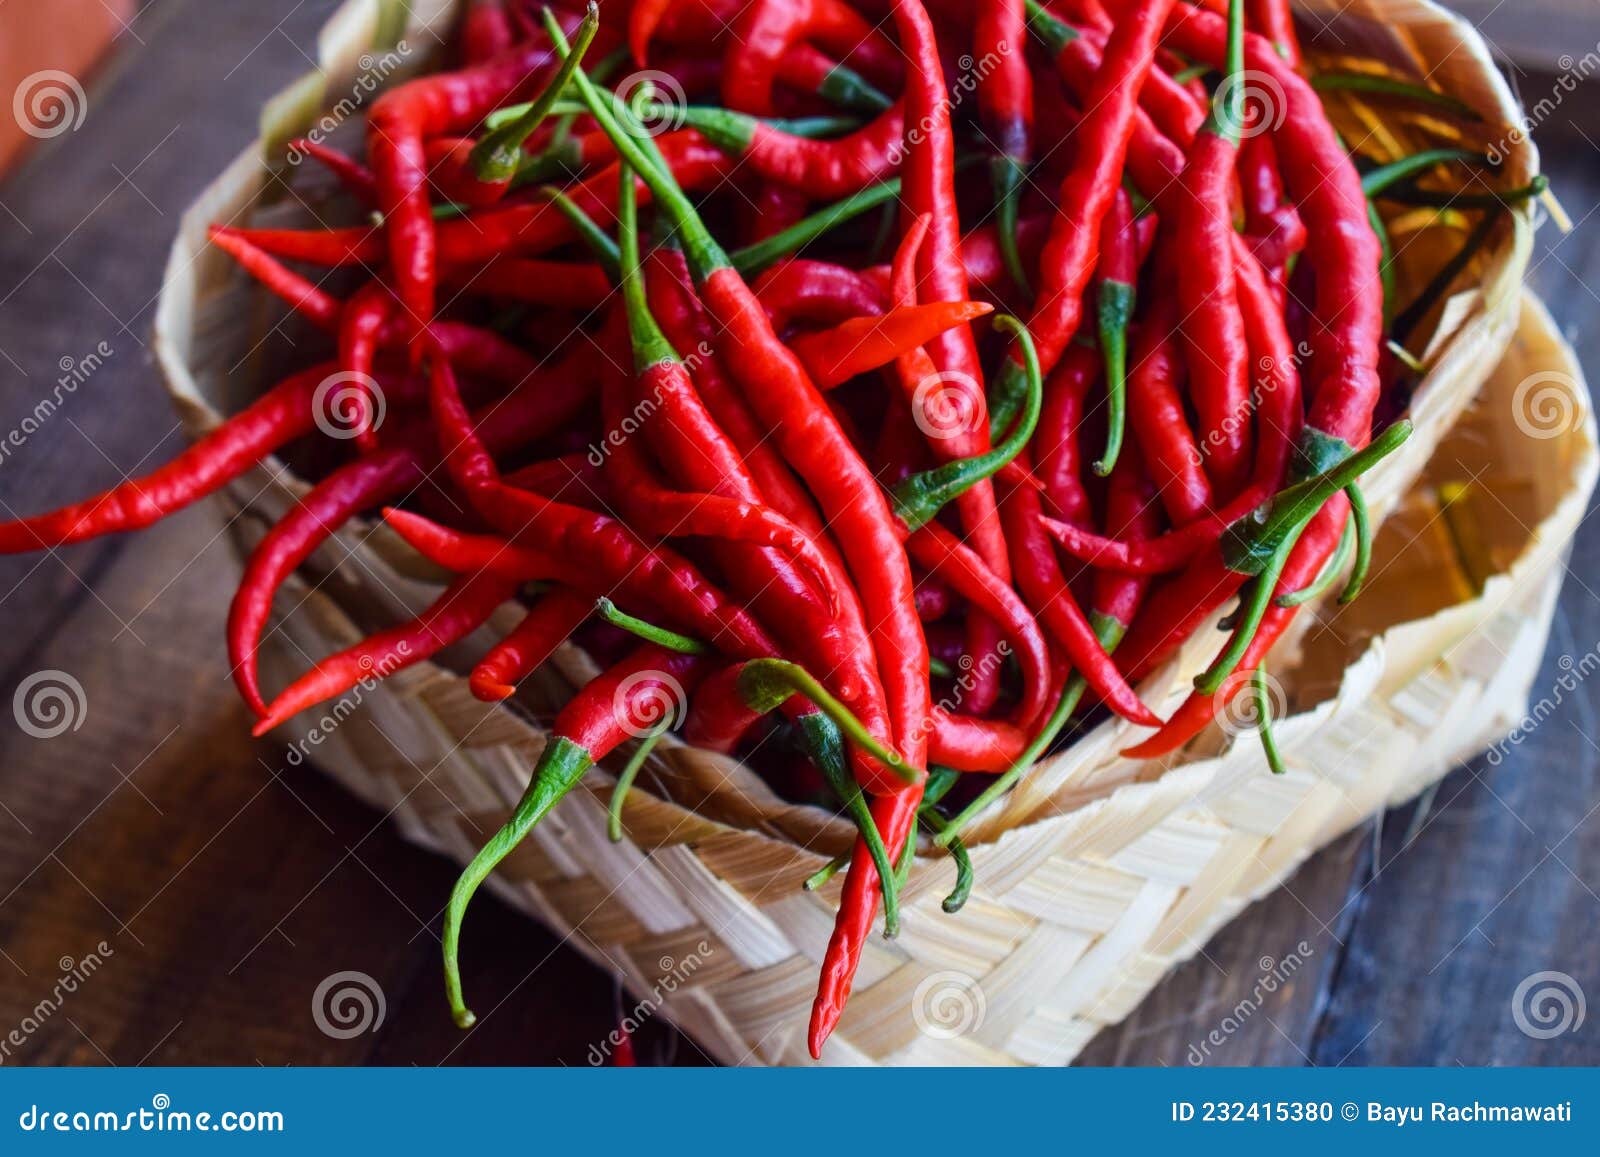 a bunch of chili in the bamboo box